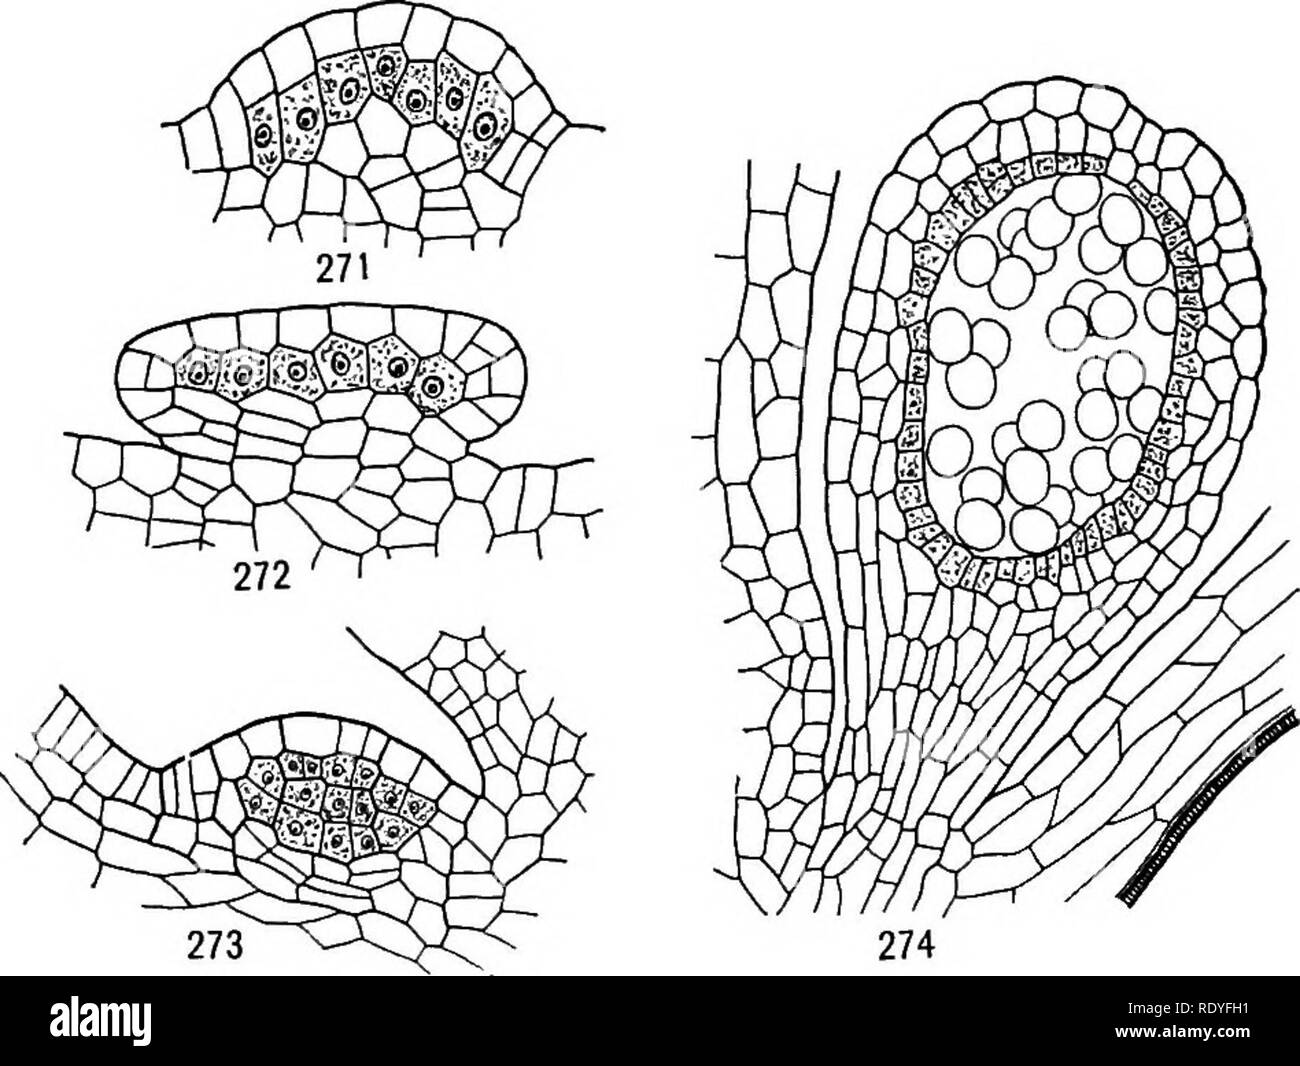 . A textbook of botany for colleges and universities ... Botany. I2&amp; MORPHOLOGY 270, 271, 272). The outer cells are the primary wall cells, which by subsequent divisions give rise to a sporangium wall of at least three layers of cells. The inner cells are the primary sporogenous cells, which by subsequent divisions give rise to a considerable mass of sporogenous tissue (fig. 273). This method of sporangium formation, by which the inner cells, following periclinal division of the superficial initials, give rise to the sporogenous tissue, is called the eusporangiate method, and plants exhibi Stock Photo